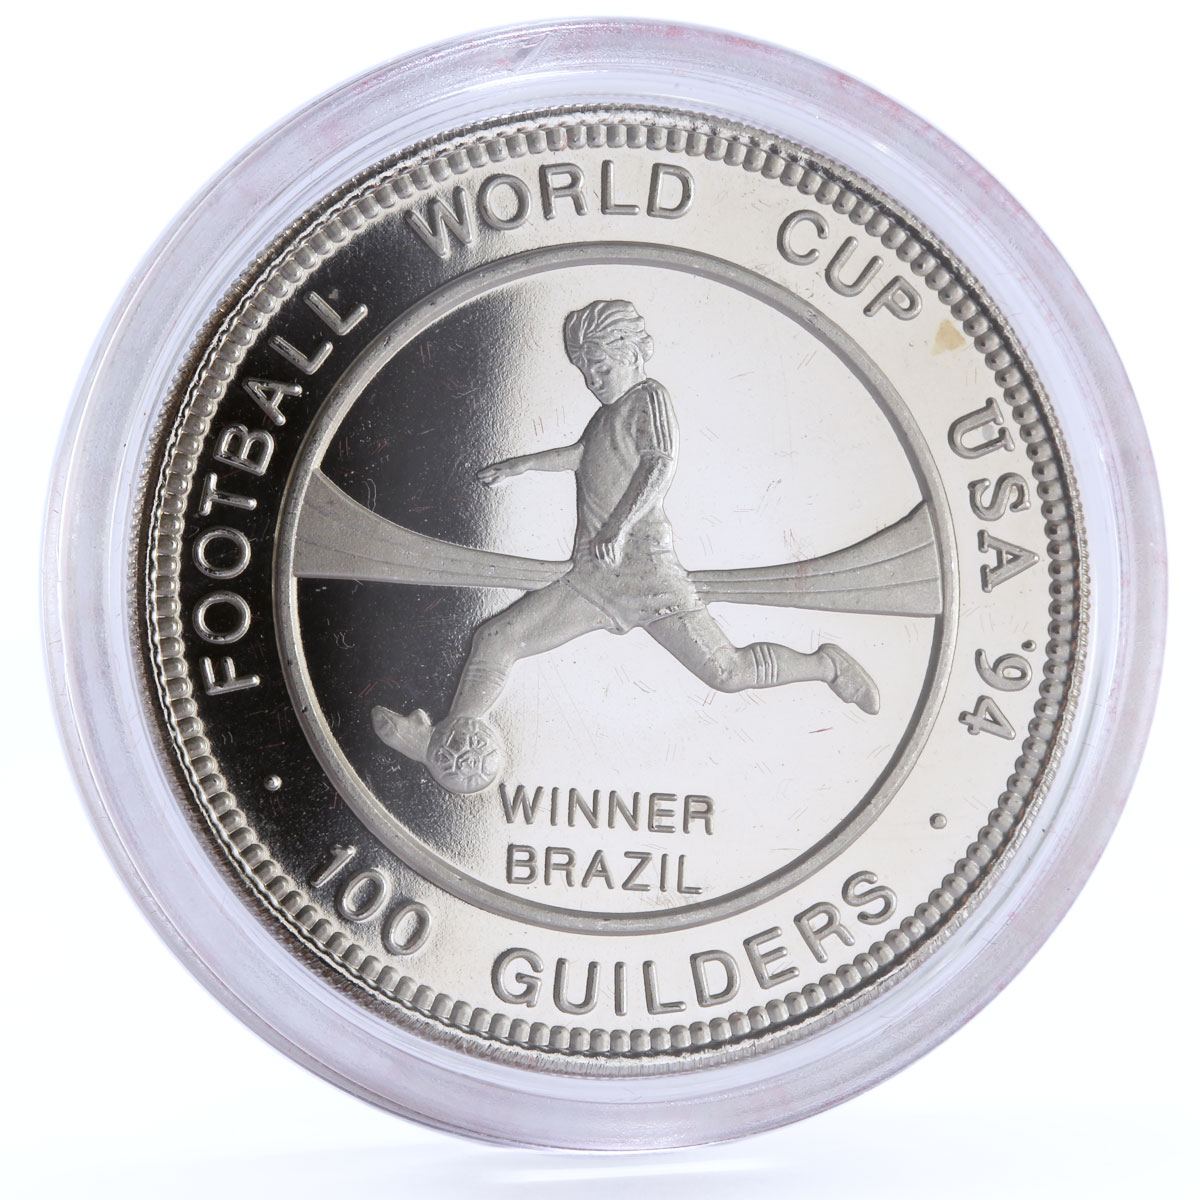 Suriname 100 guilders Football World Cup in USA Winner Brazil CuNi coin 1994